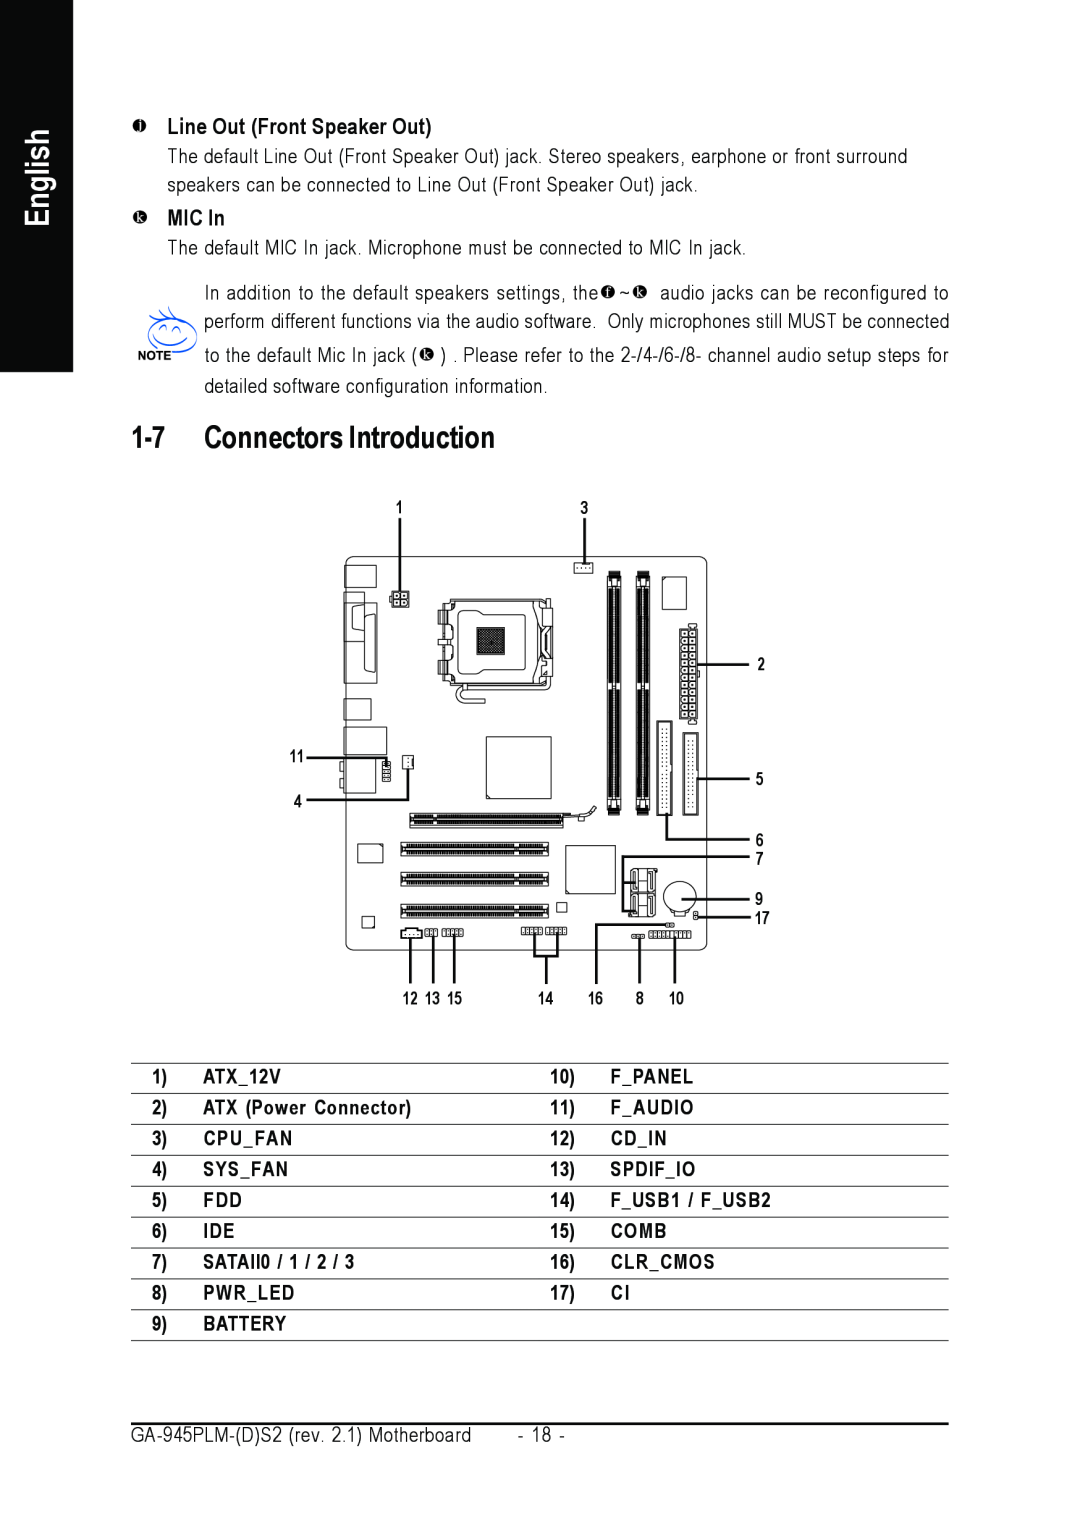 Gigabyte GA-945PLM-(D)S2 user manual Connectors Introduction, Line Out Front Speaker Out, MIC In, English 